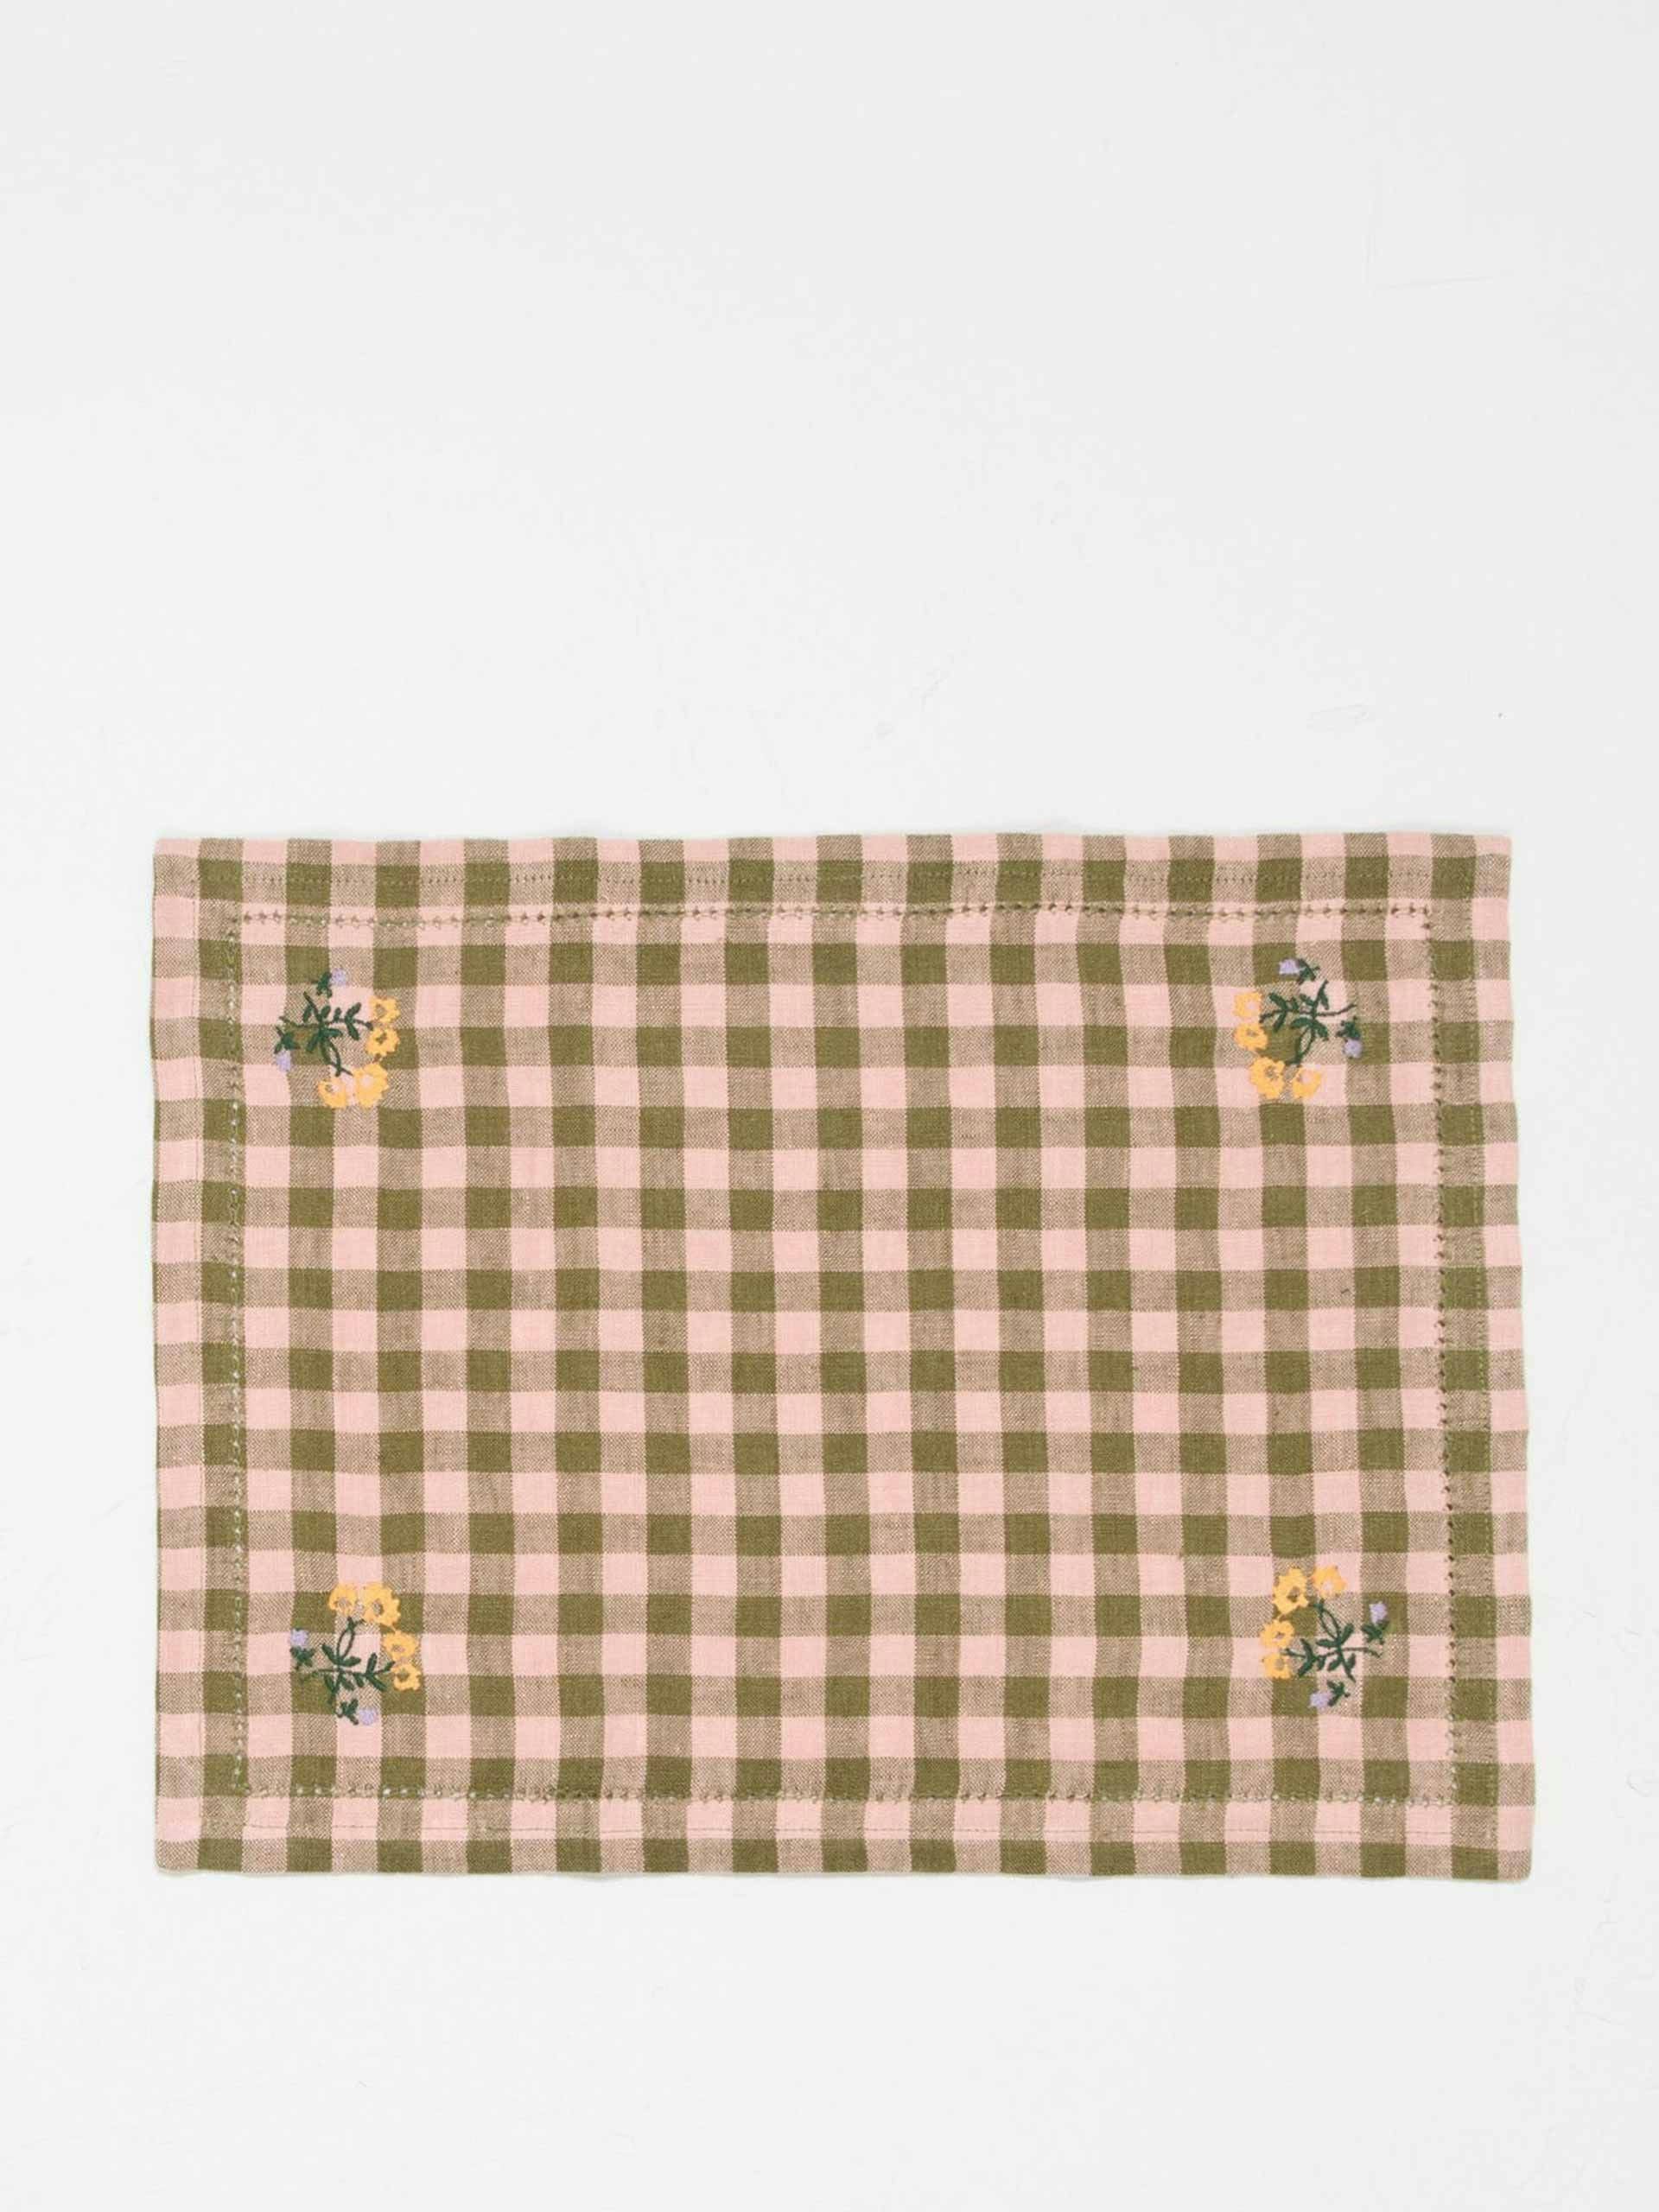 Floral embroidered gingham placemat